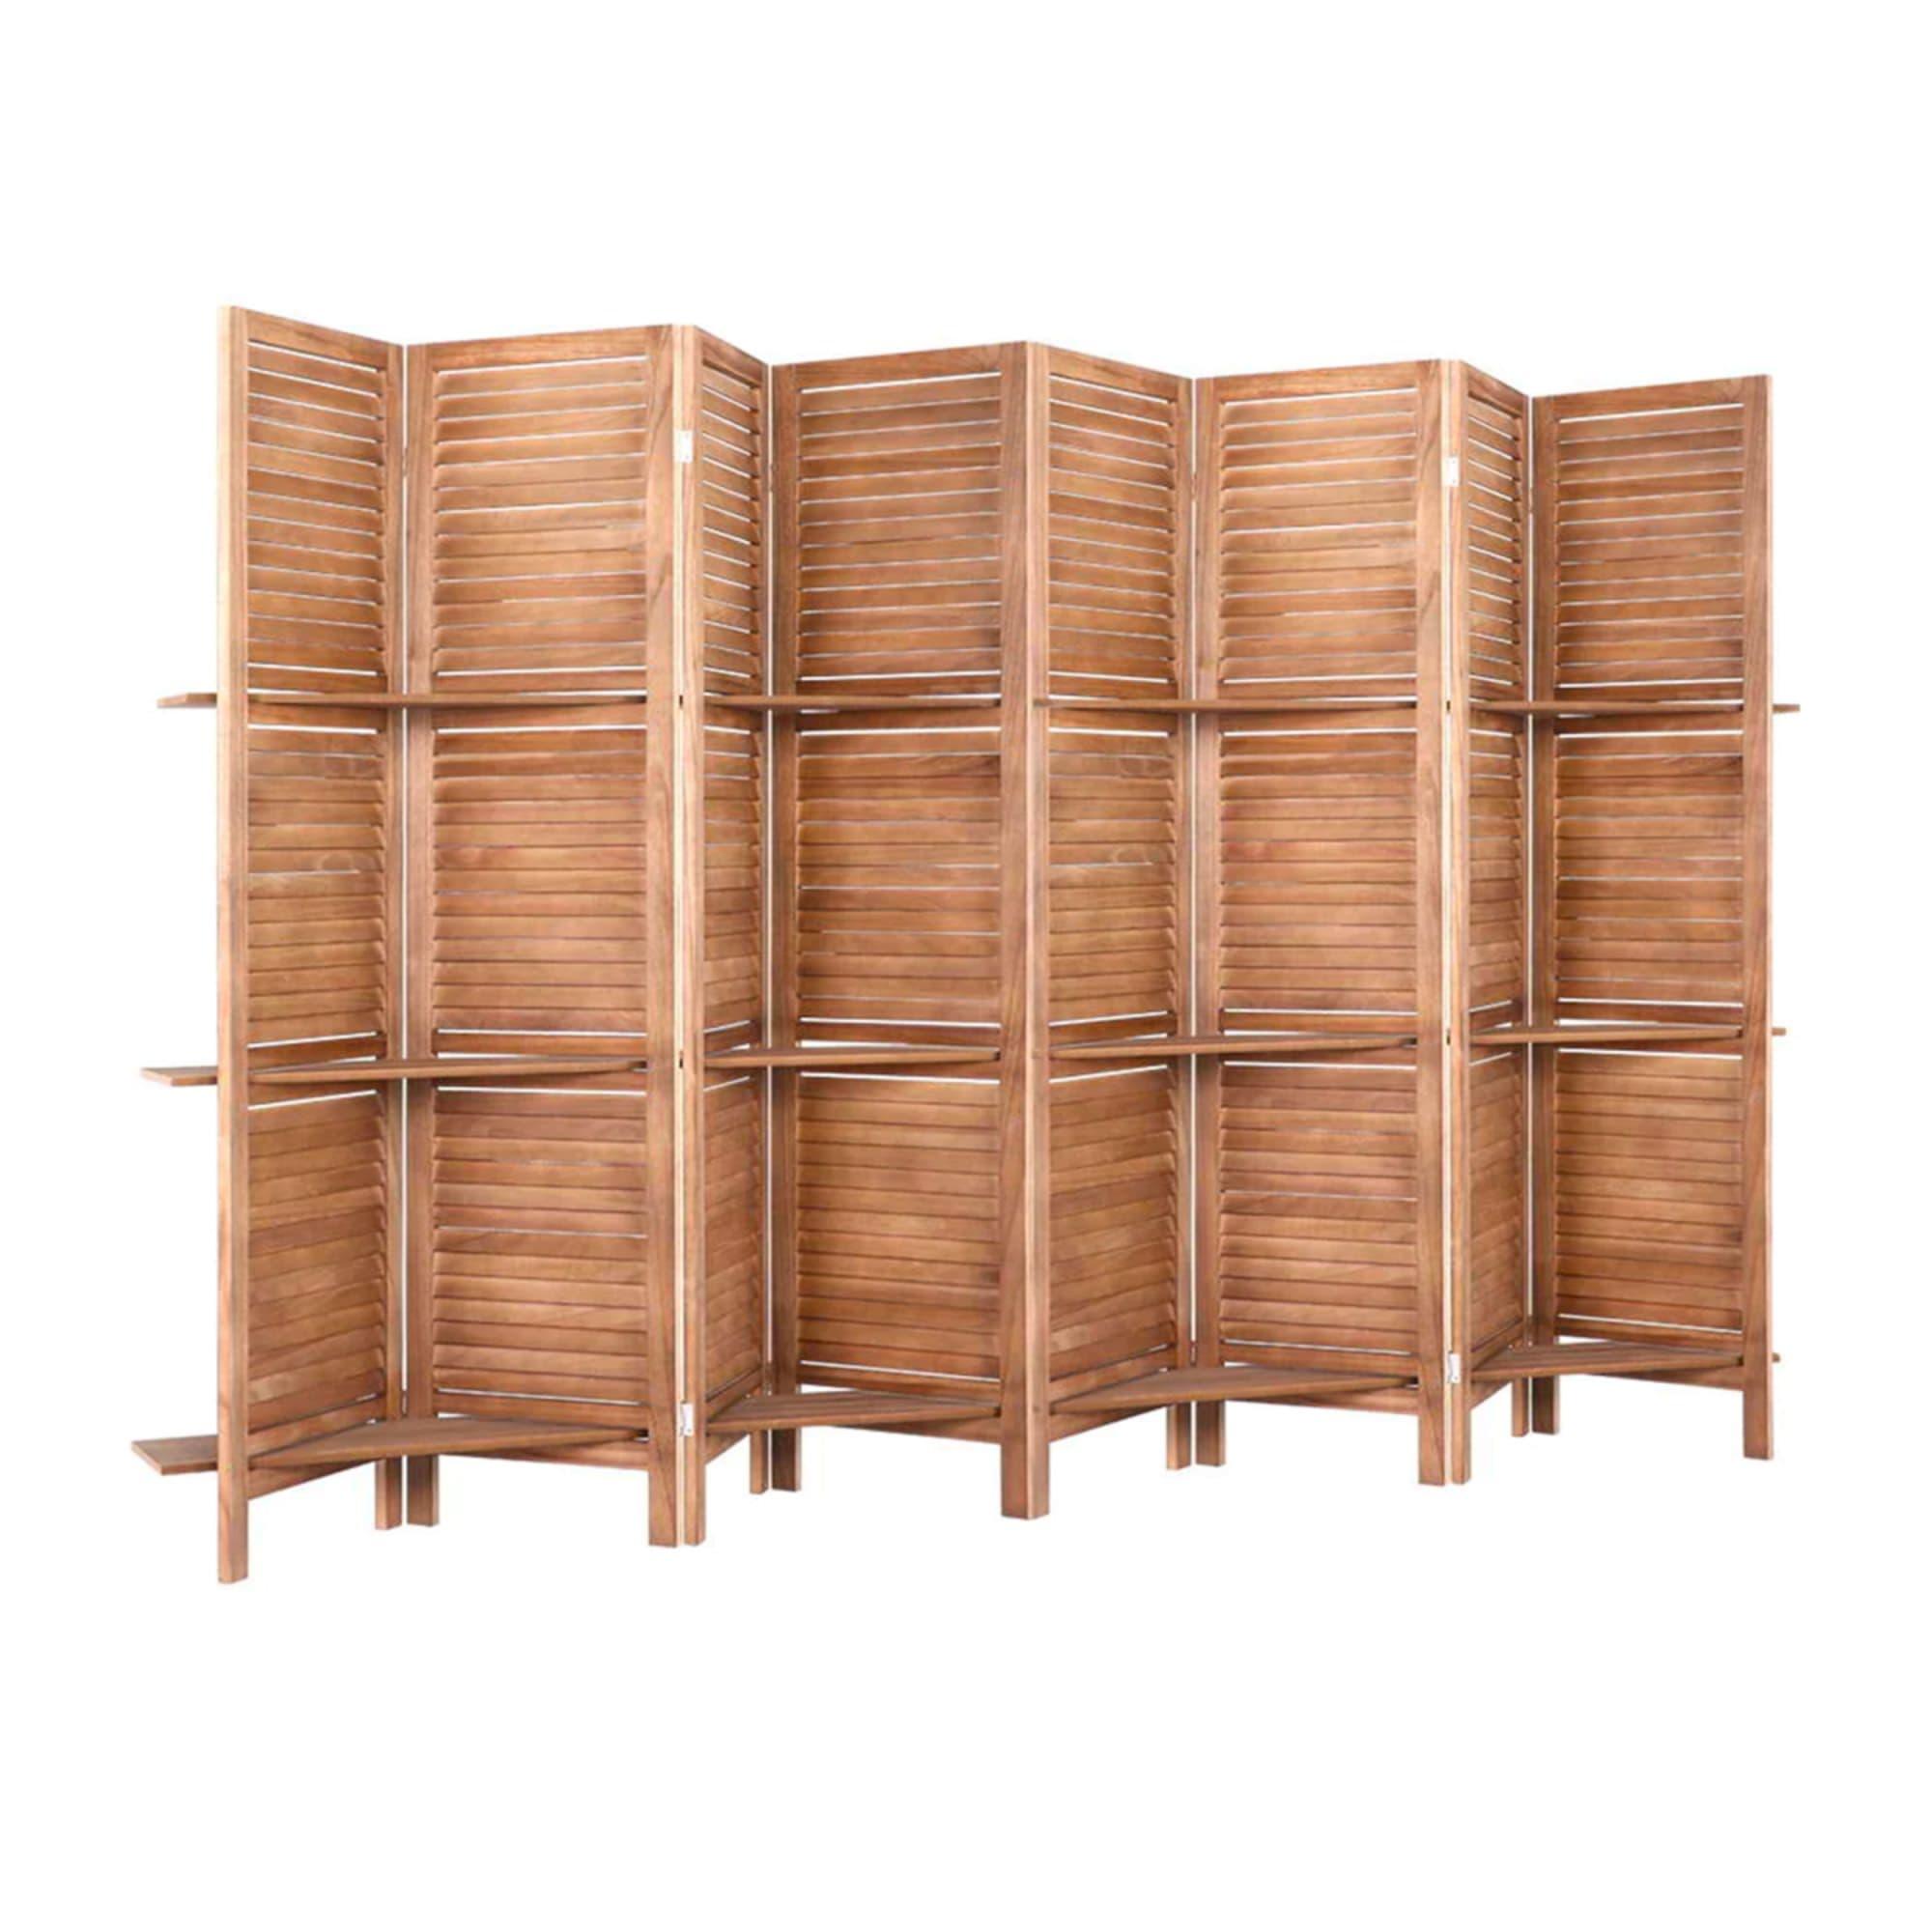 Artiss 8 Panel Wooden Room Divider with Shelf Brown Image 3